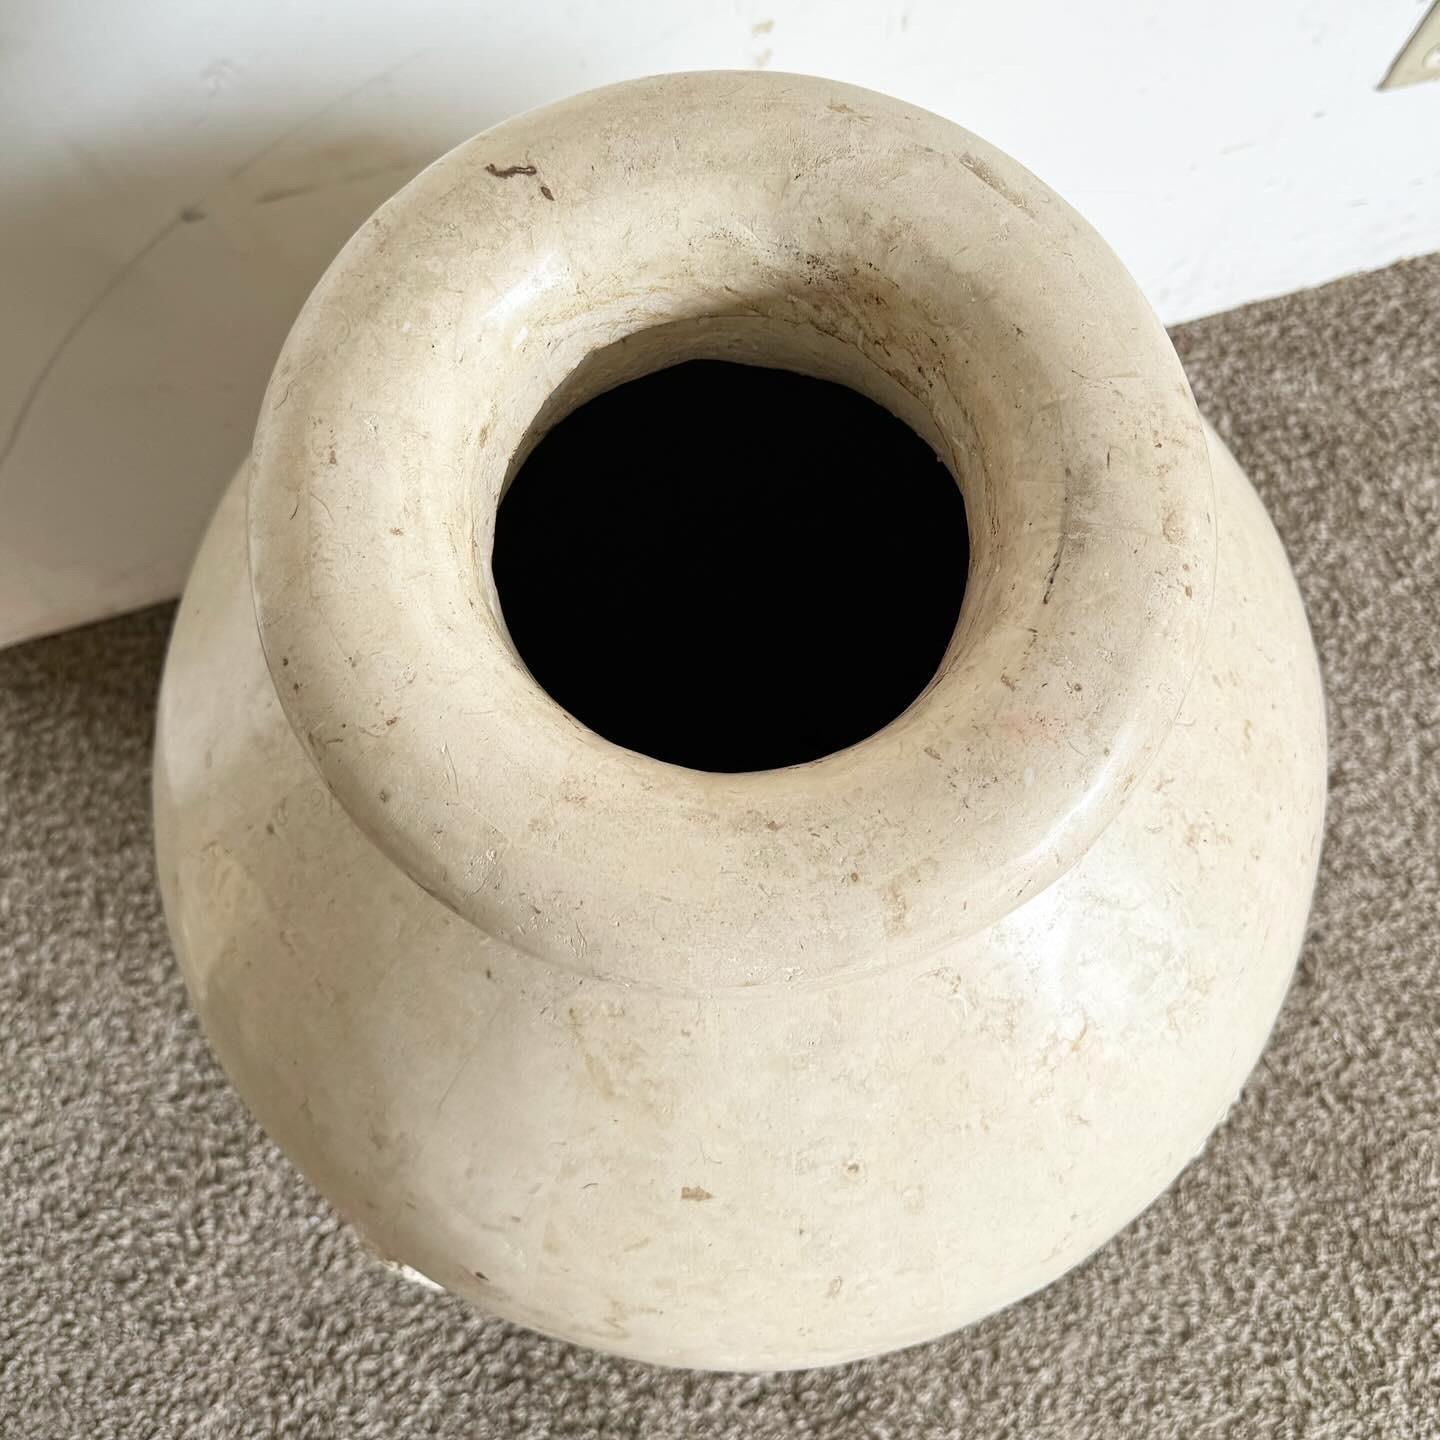 Elevate your decor with the Postmodern Polished and Raw Tessellated Stone Floor Vase. This unique vase combines polished and raw stone, offering a stunning visual and textural contrast. Ideal for lovers of natural beauty and postmodern design, it